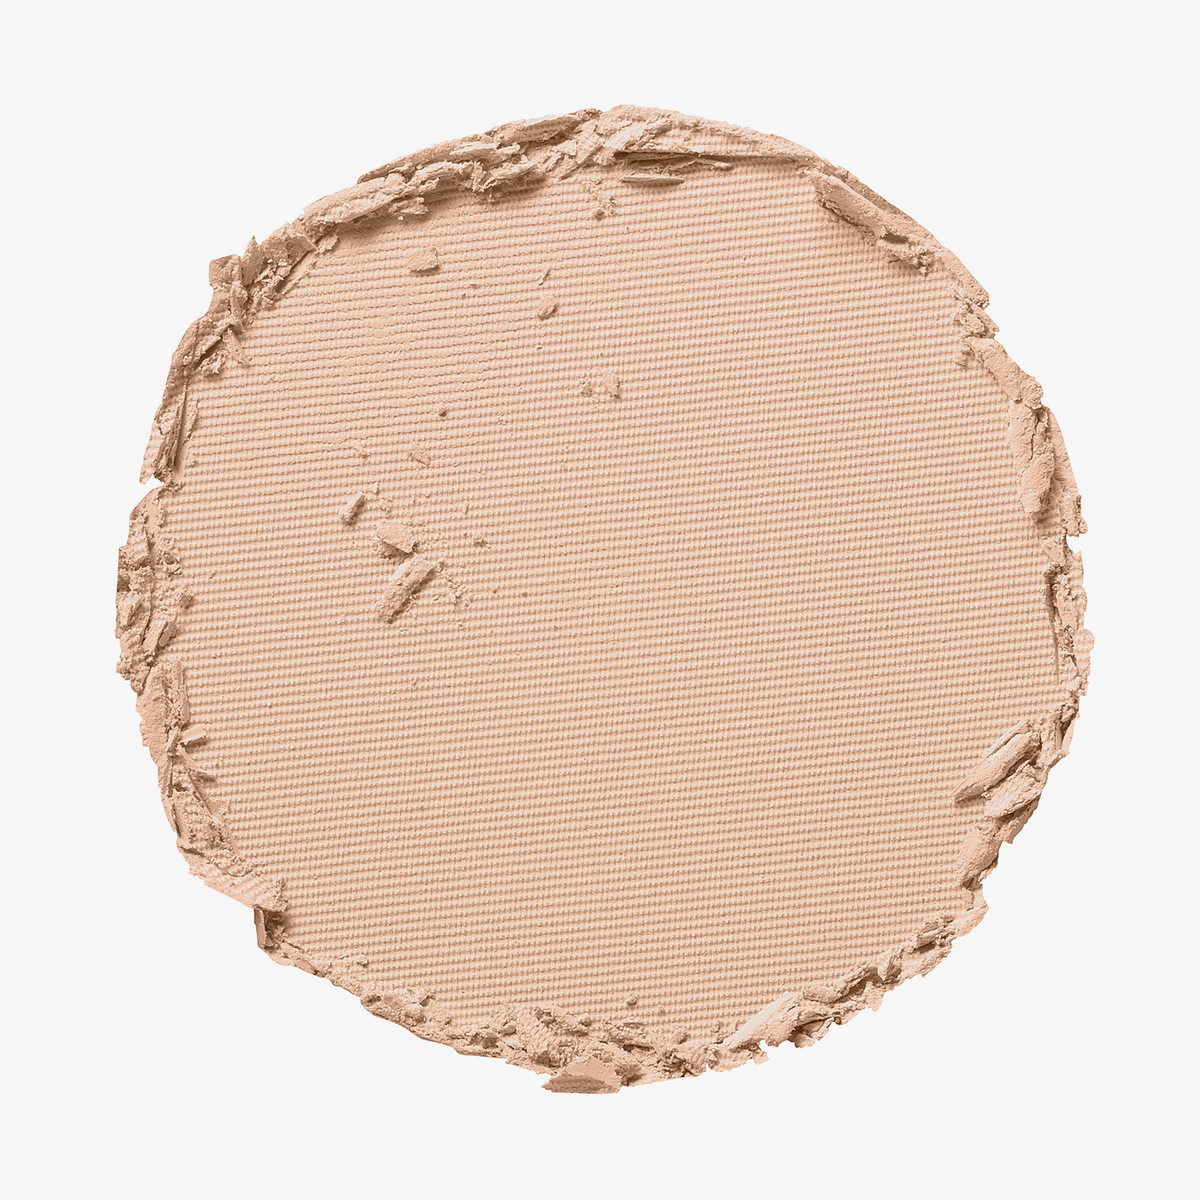 Pür Cosmetics | 4-in-1 Pressed Mineral Makeup Ivory